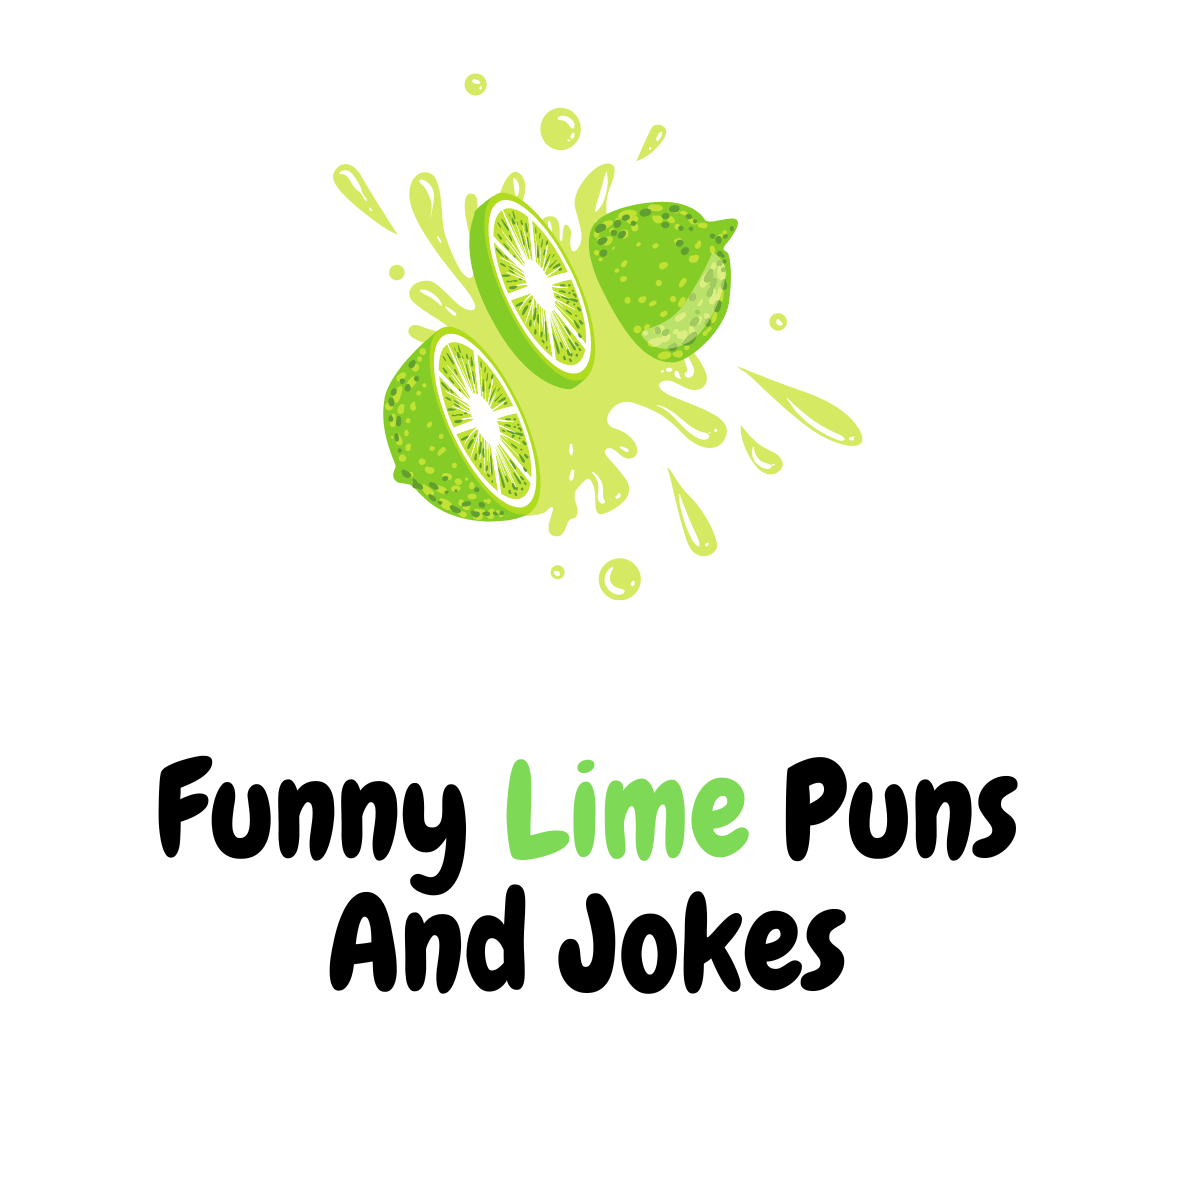 Funny Lime Puns And Jokes